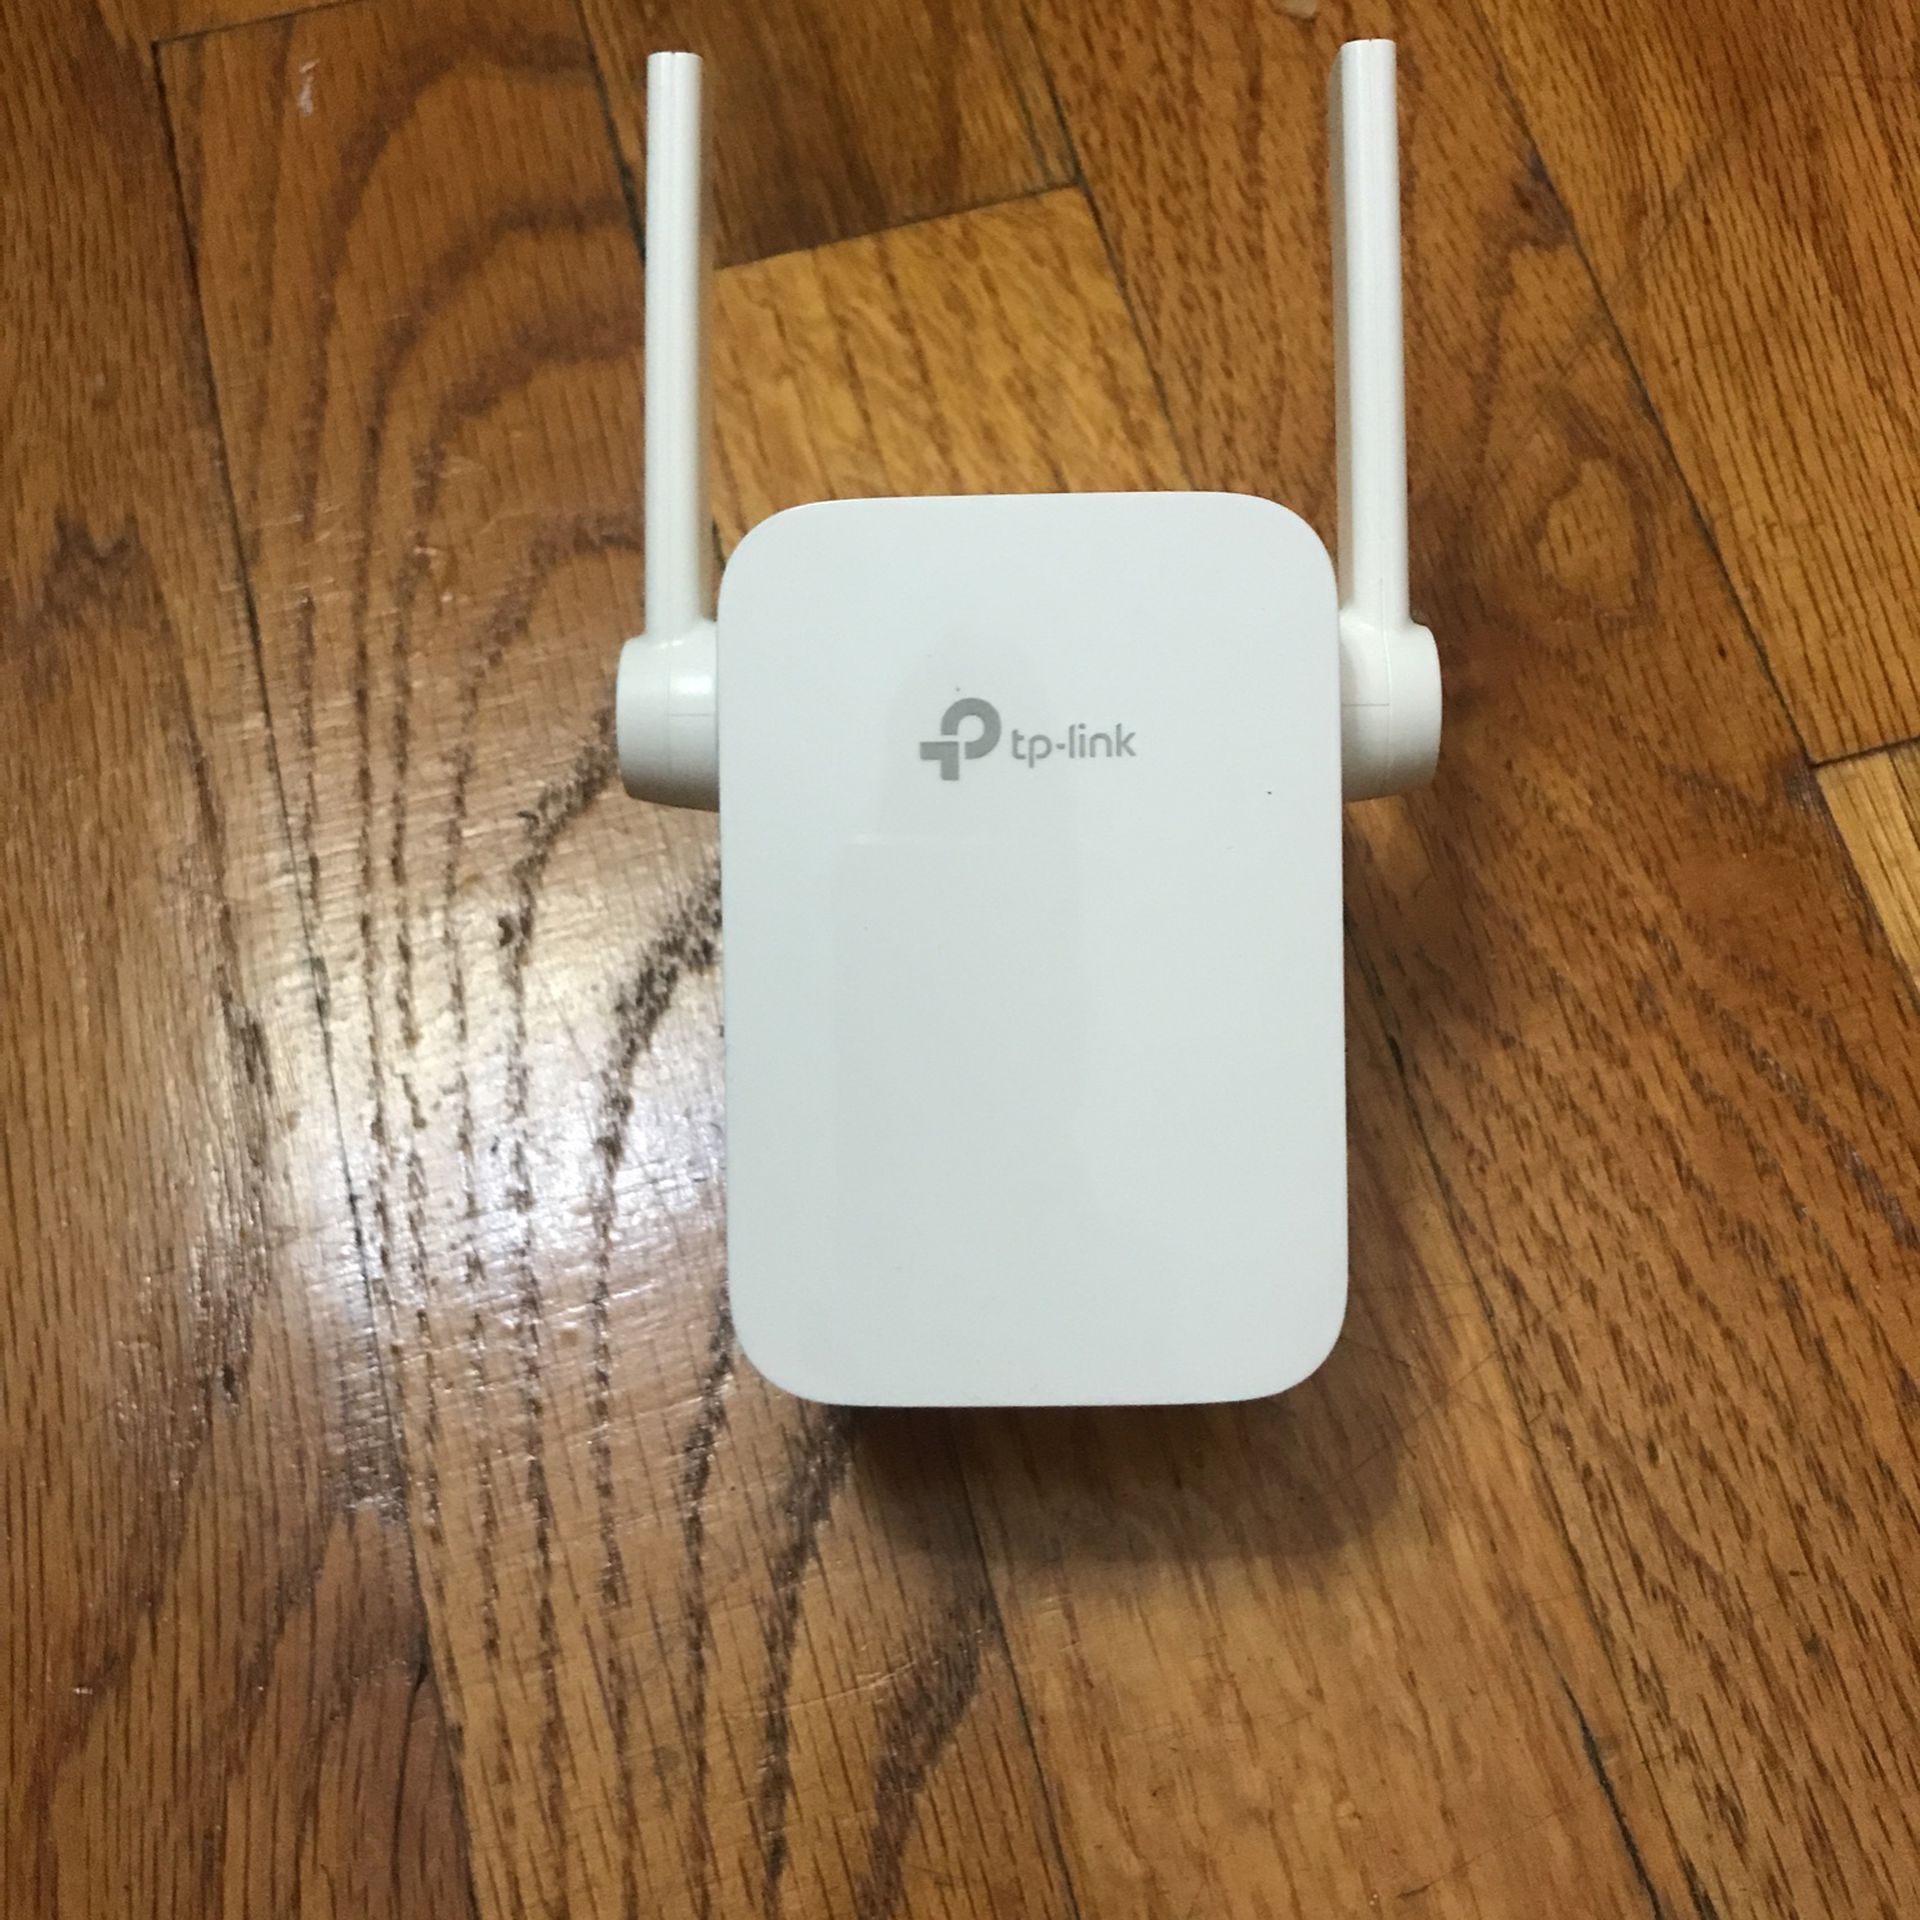 TP-Link N300 WiFi Extender(RE105), WiFi Extenders Signal Booster for Home, Single Band WiFi Range Extender, Booster, Access Point, W for Sale in New York, NY - OfferUp